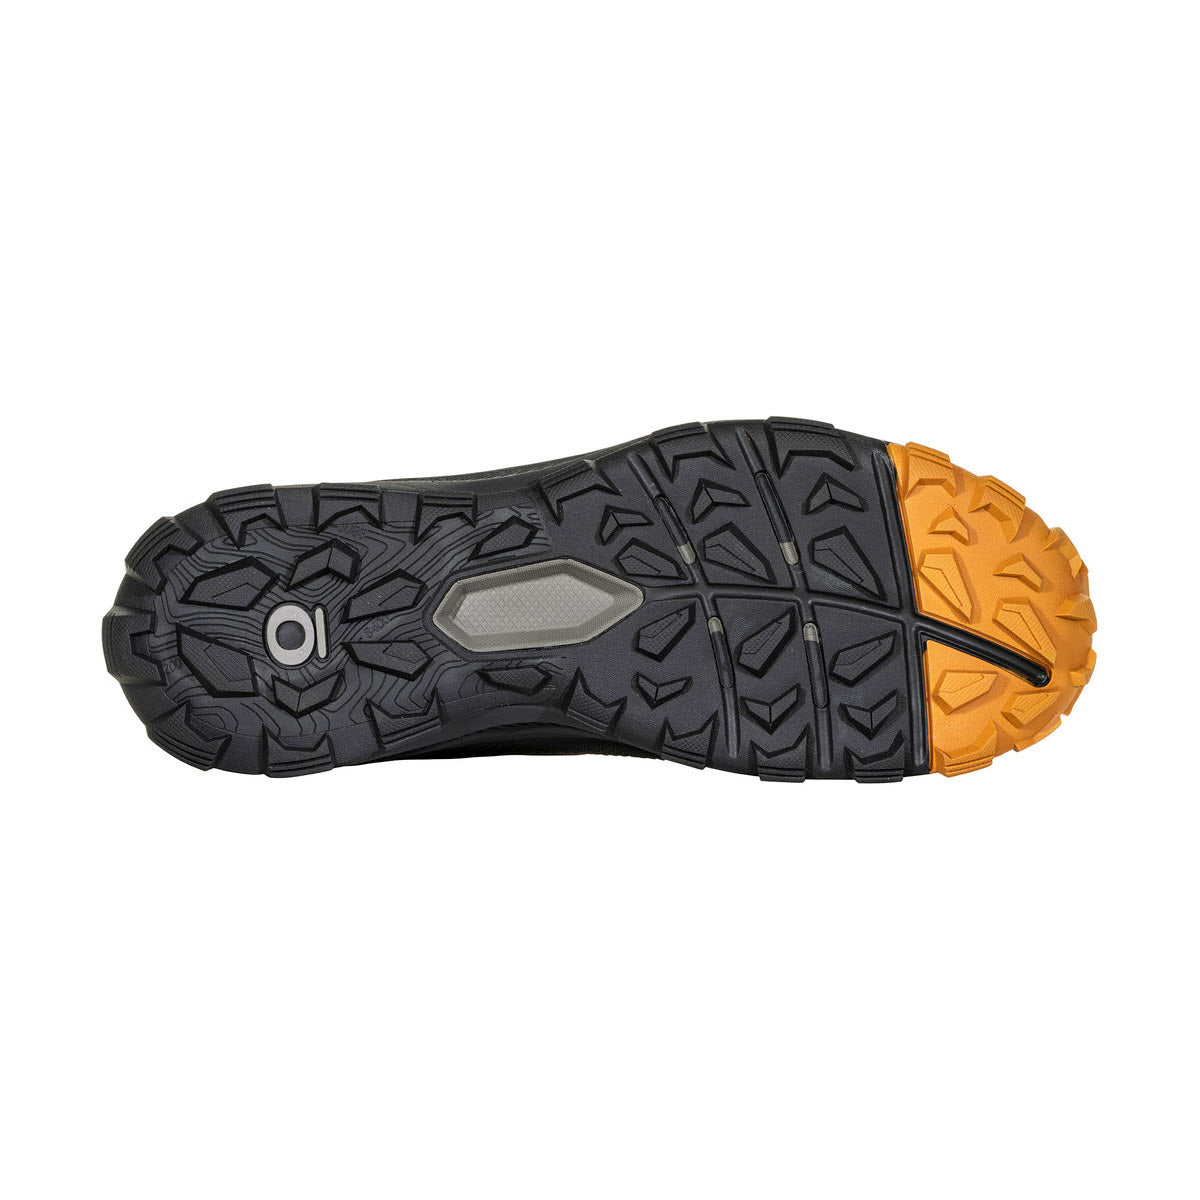 Sole of an Oboz Katabatic Mid B-Dry Hazy Gray - Mens hiking shoe with a black and gray tread pattern and an orange heel section.